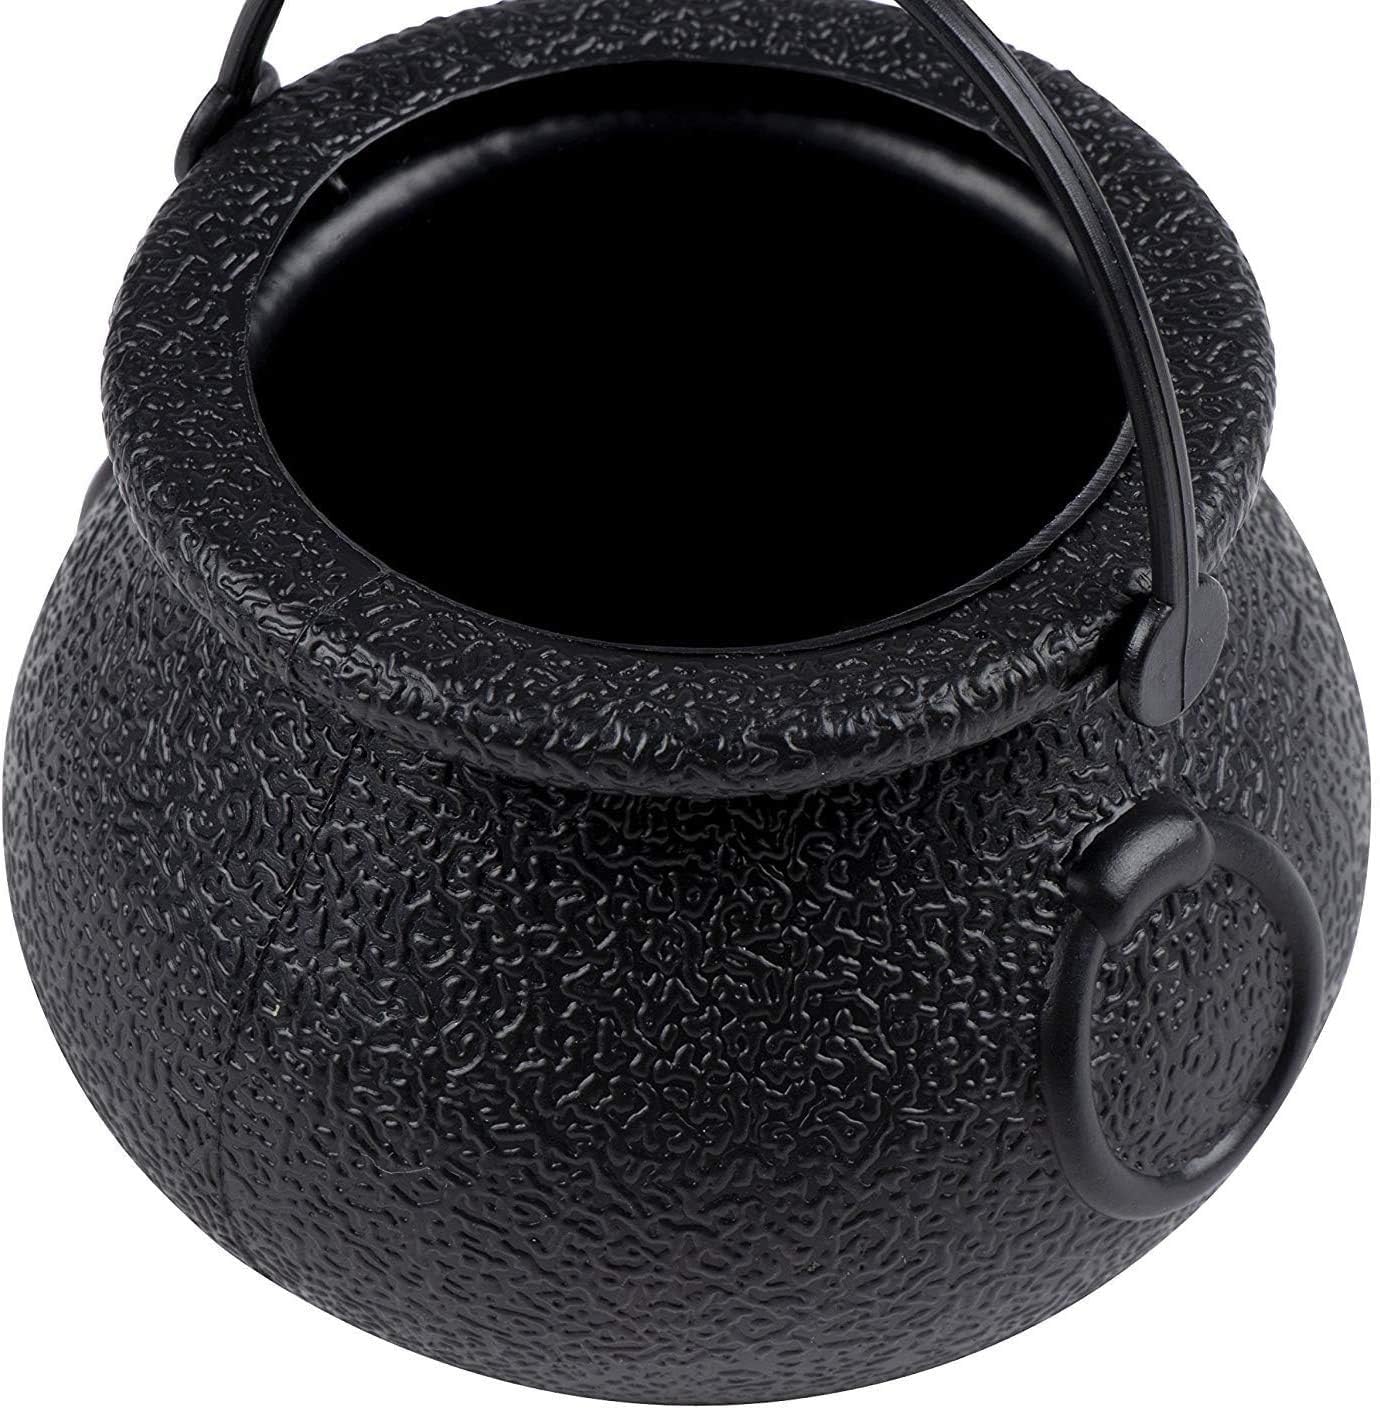 24 PCS Candy Kettle Black Novelty Cauldron Kettles with Handle for Halloween Trick or Treat Party Favors Mini Black Witch Cauldron